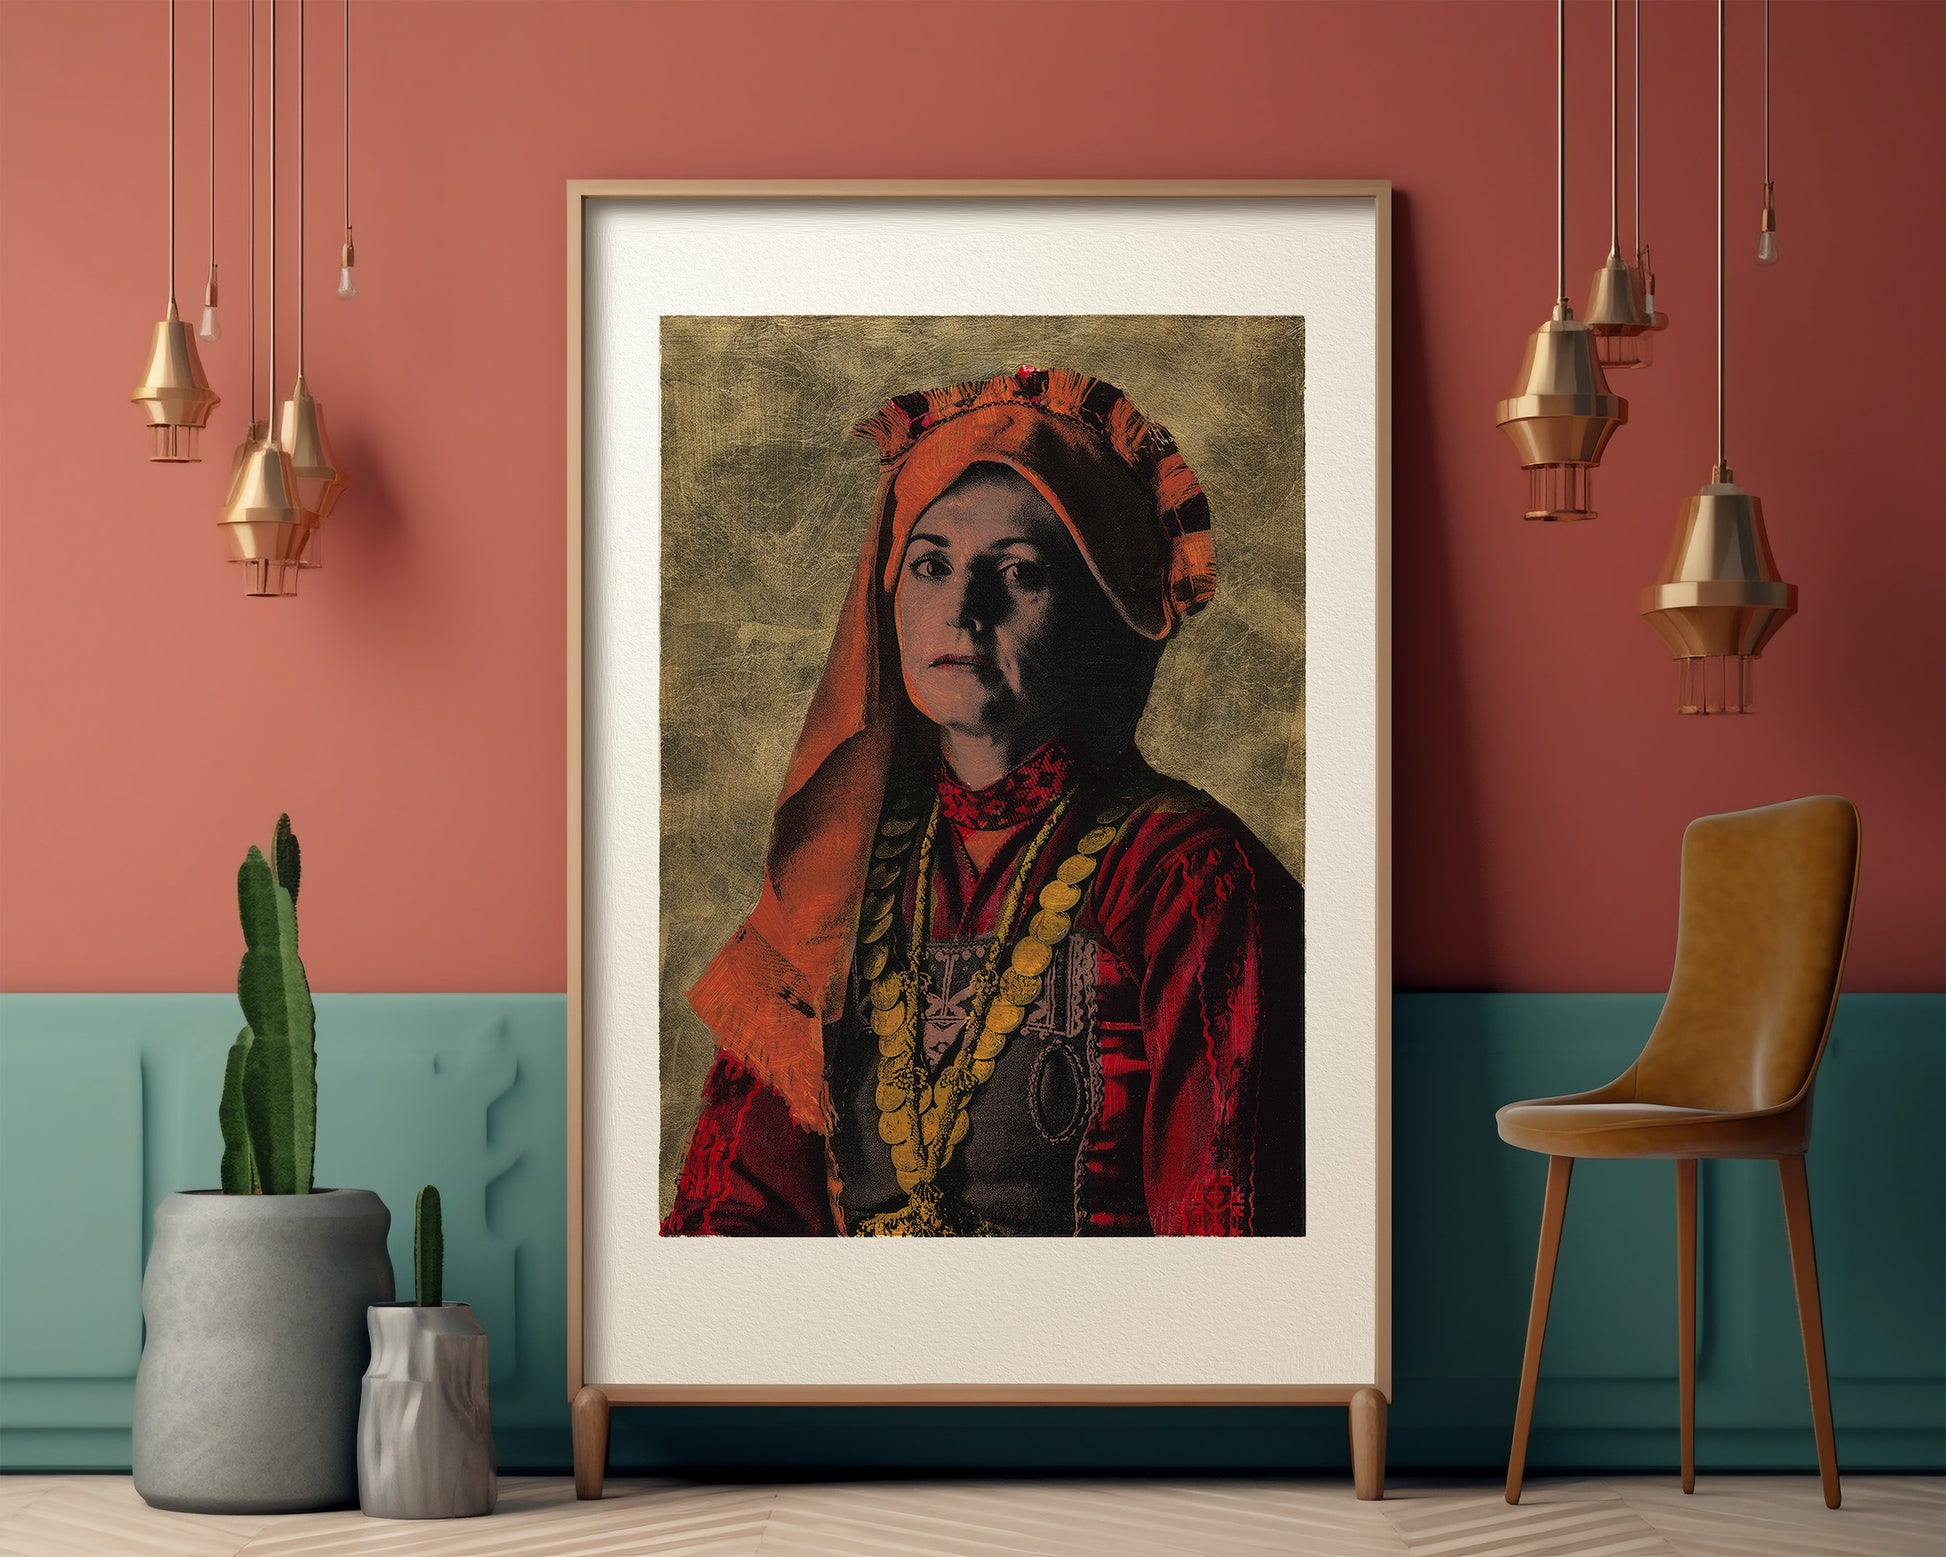 Painting Pop Art Wall Art from Greece | Golden Mani Costume from Evros, Thrace, by George Tatakis - inside an eclectic room